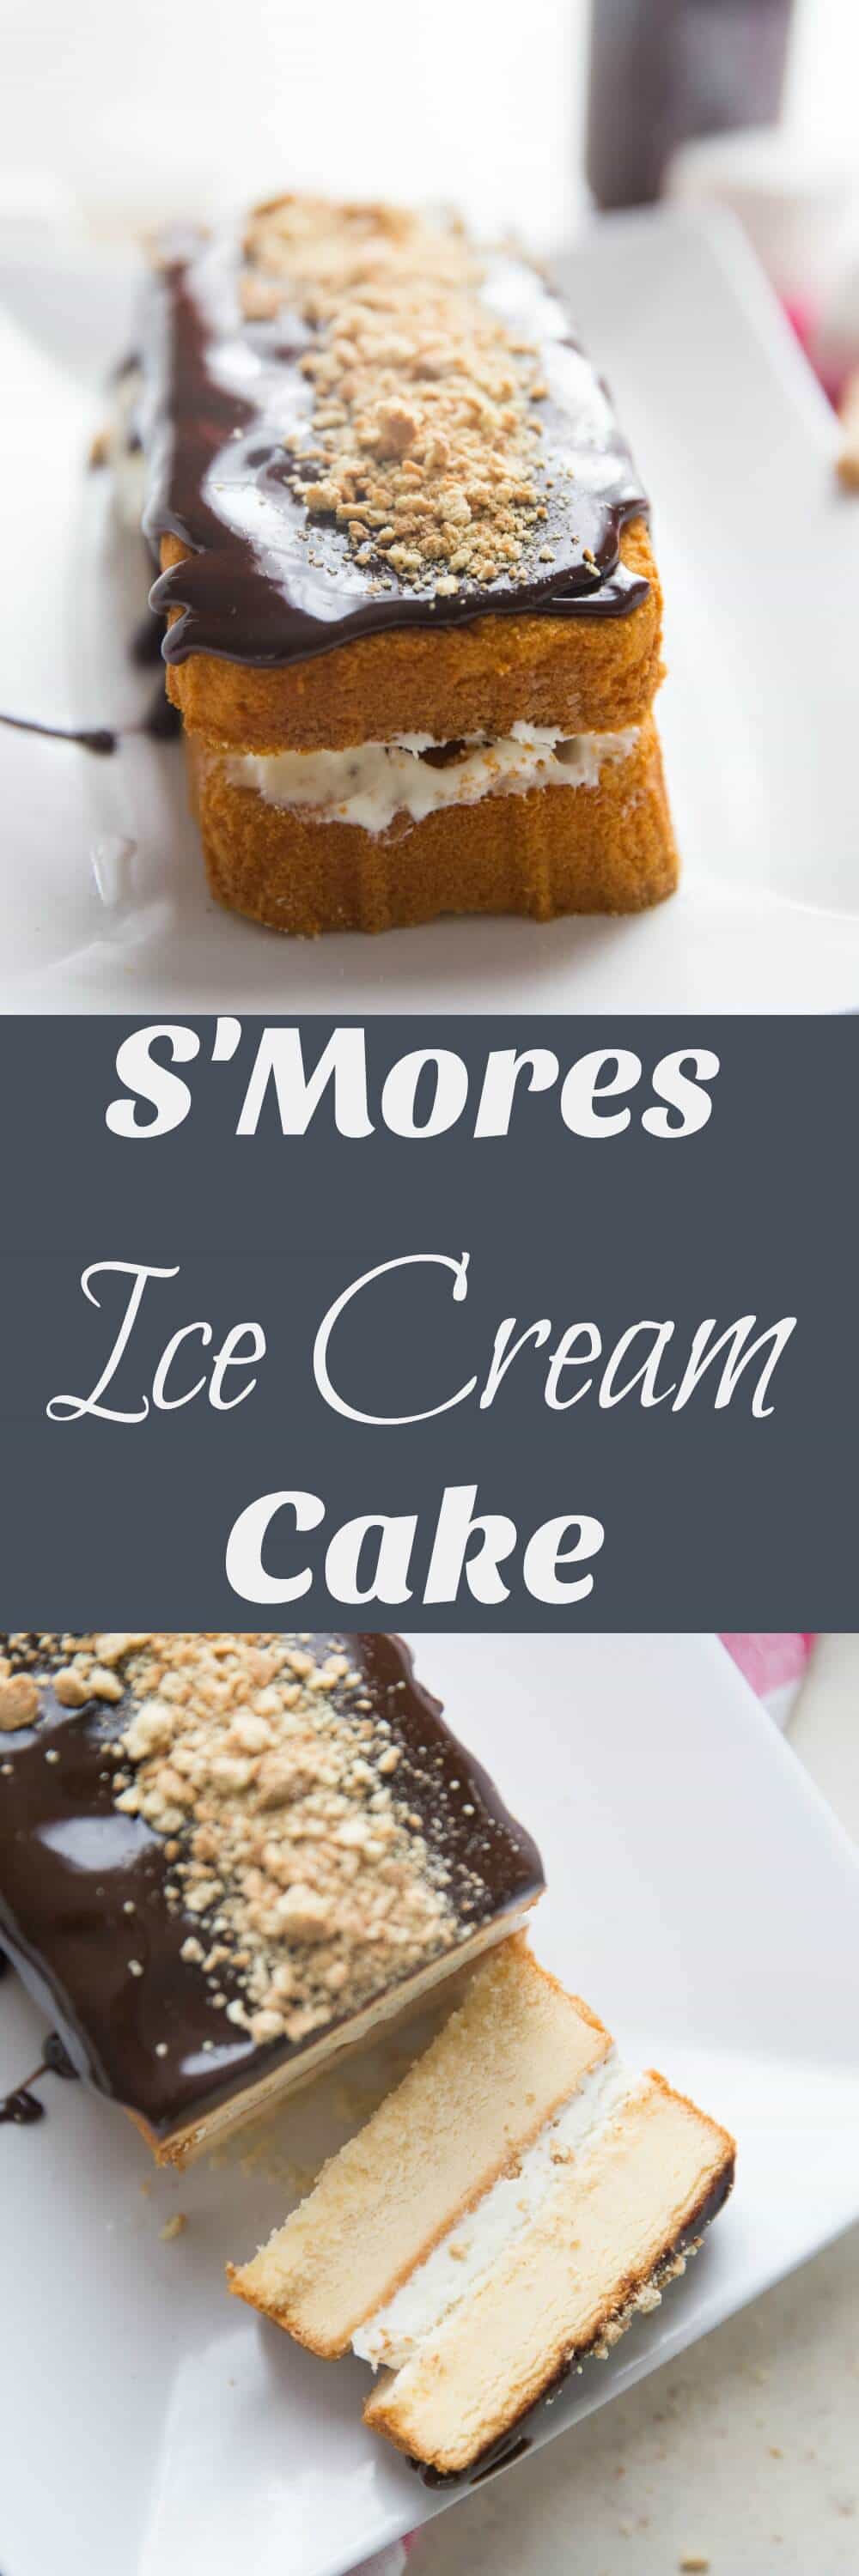 S'mores ice cream cake starts with homemade toasted marshmallow ice cream that gets sandwiched between pound cake halves! If that not's enough, chocolate sauce and graham cracker crumbs help complete this summertime masterpiece!